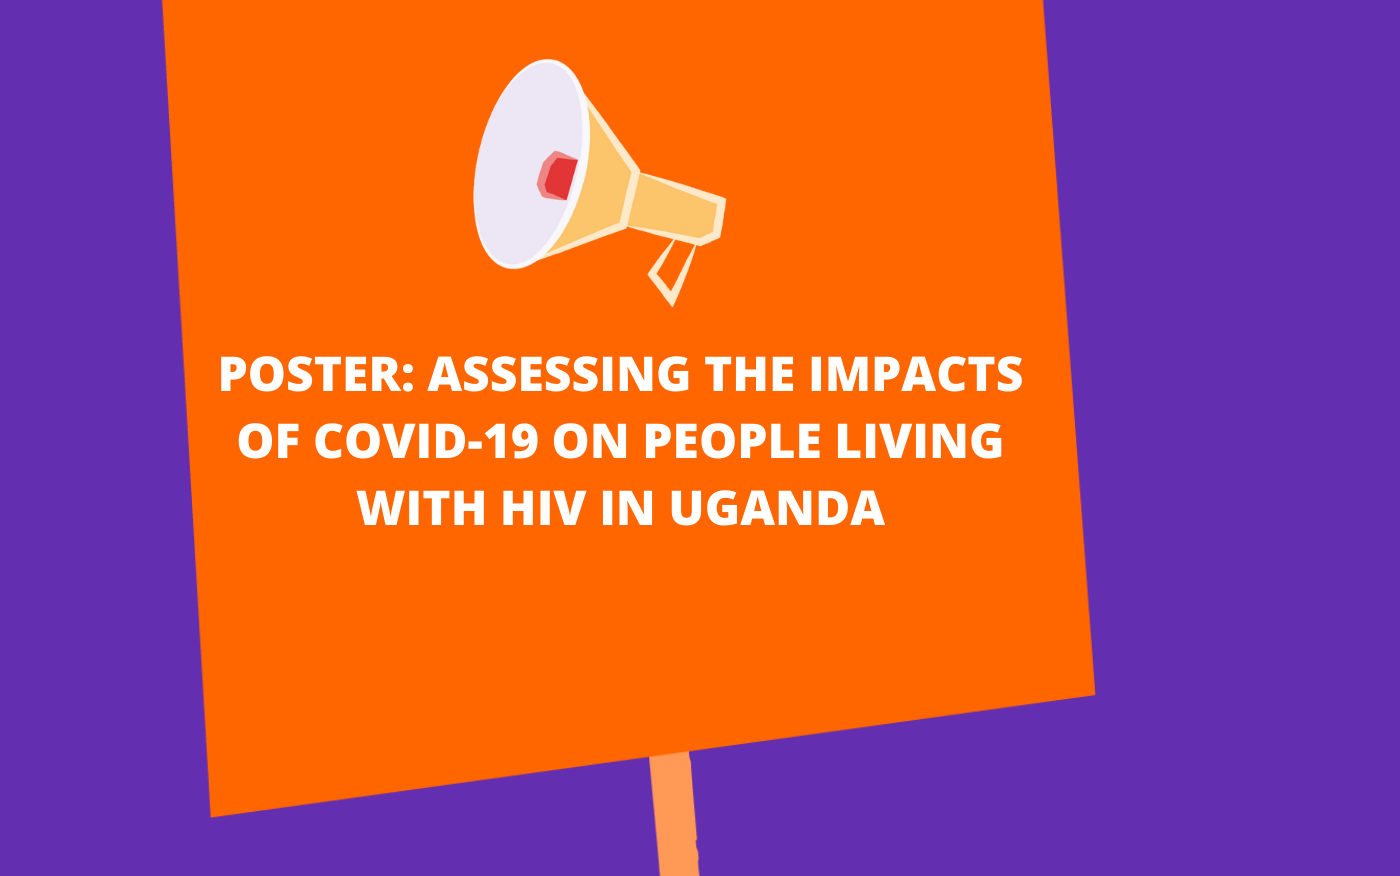 POSTER: Assessing the impacts of Covid-19 on people living with HIV in Uganda